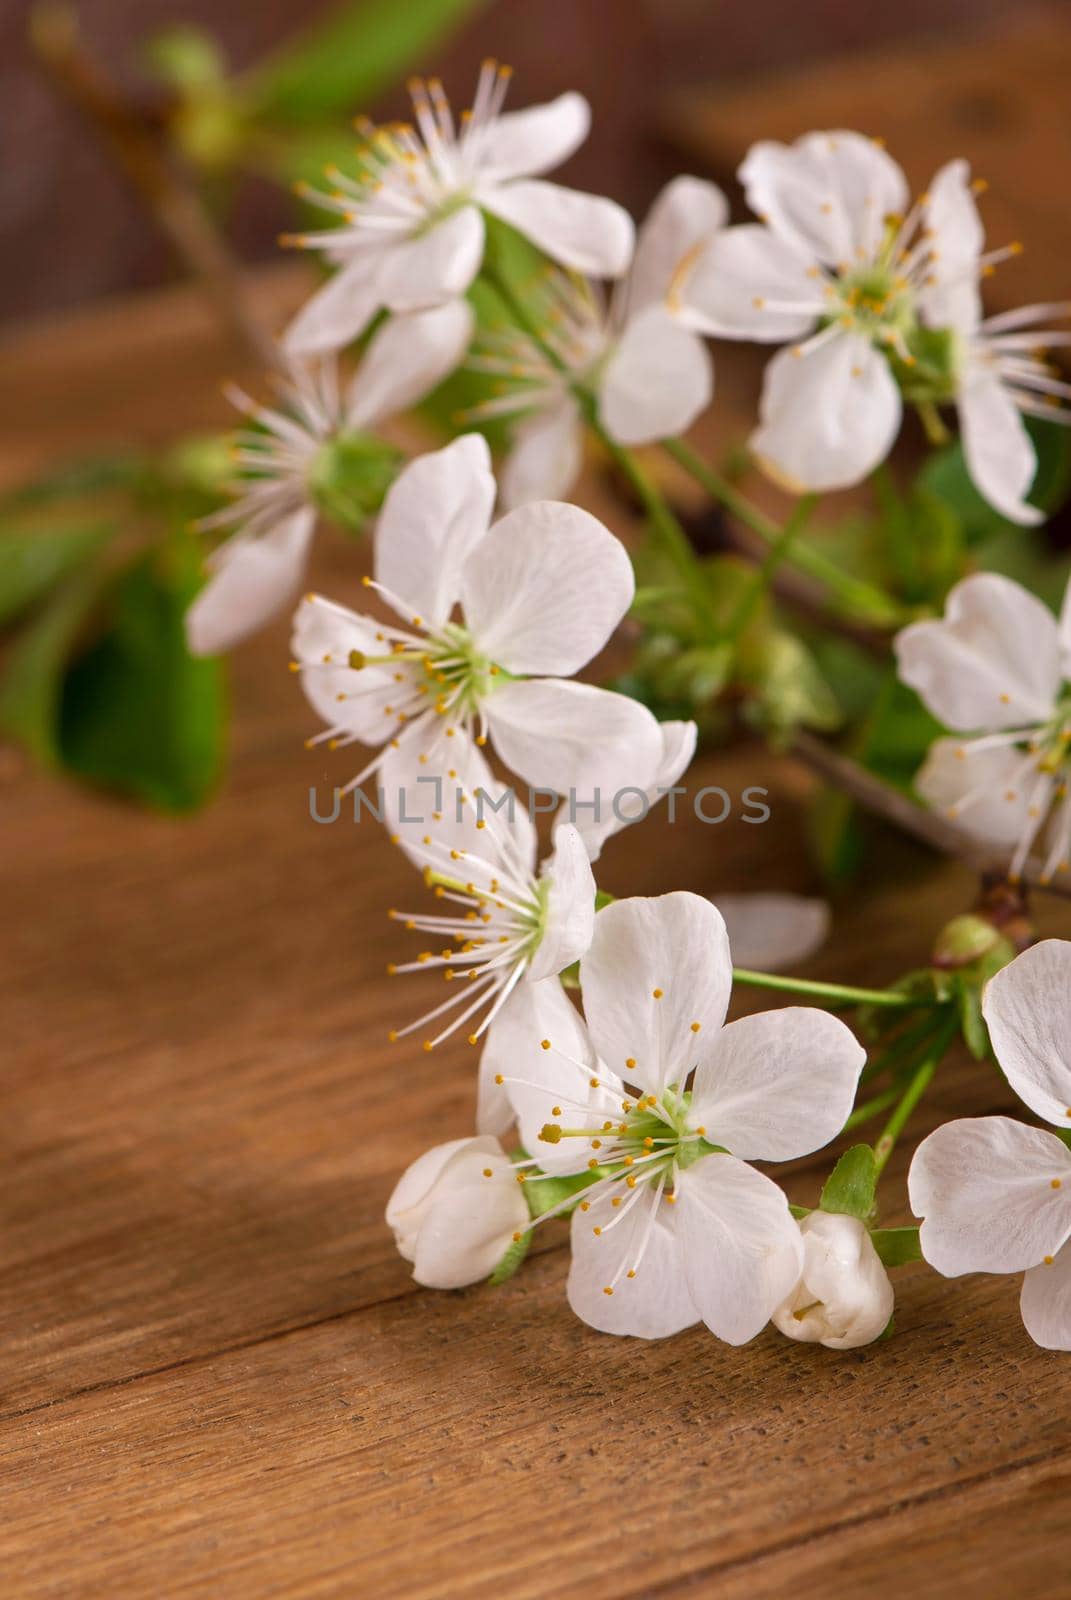 image of spring white cherry blossoms tree on wooden table. vintage filtered image by aprilphoto